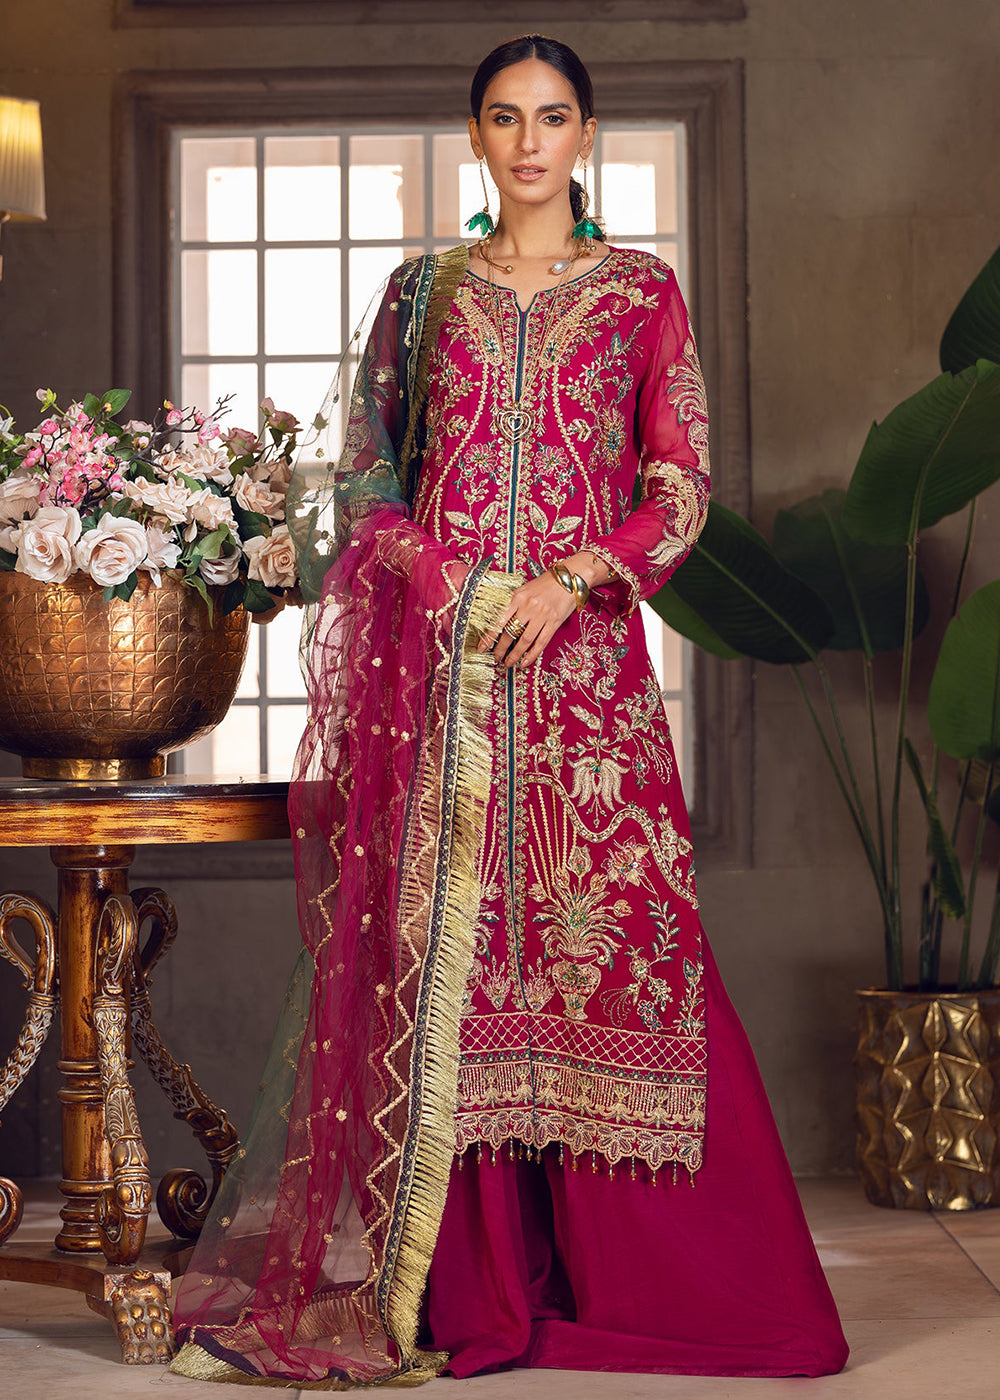 Buy Now Pink Pakistani Palazzo Suit | Emaan Adeel | Le Festa Formal Edit 7 | LF-701 Online in USA, UK, Canada & Worldwide at Empress Clothing. 